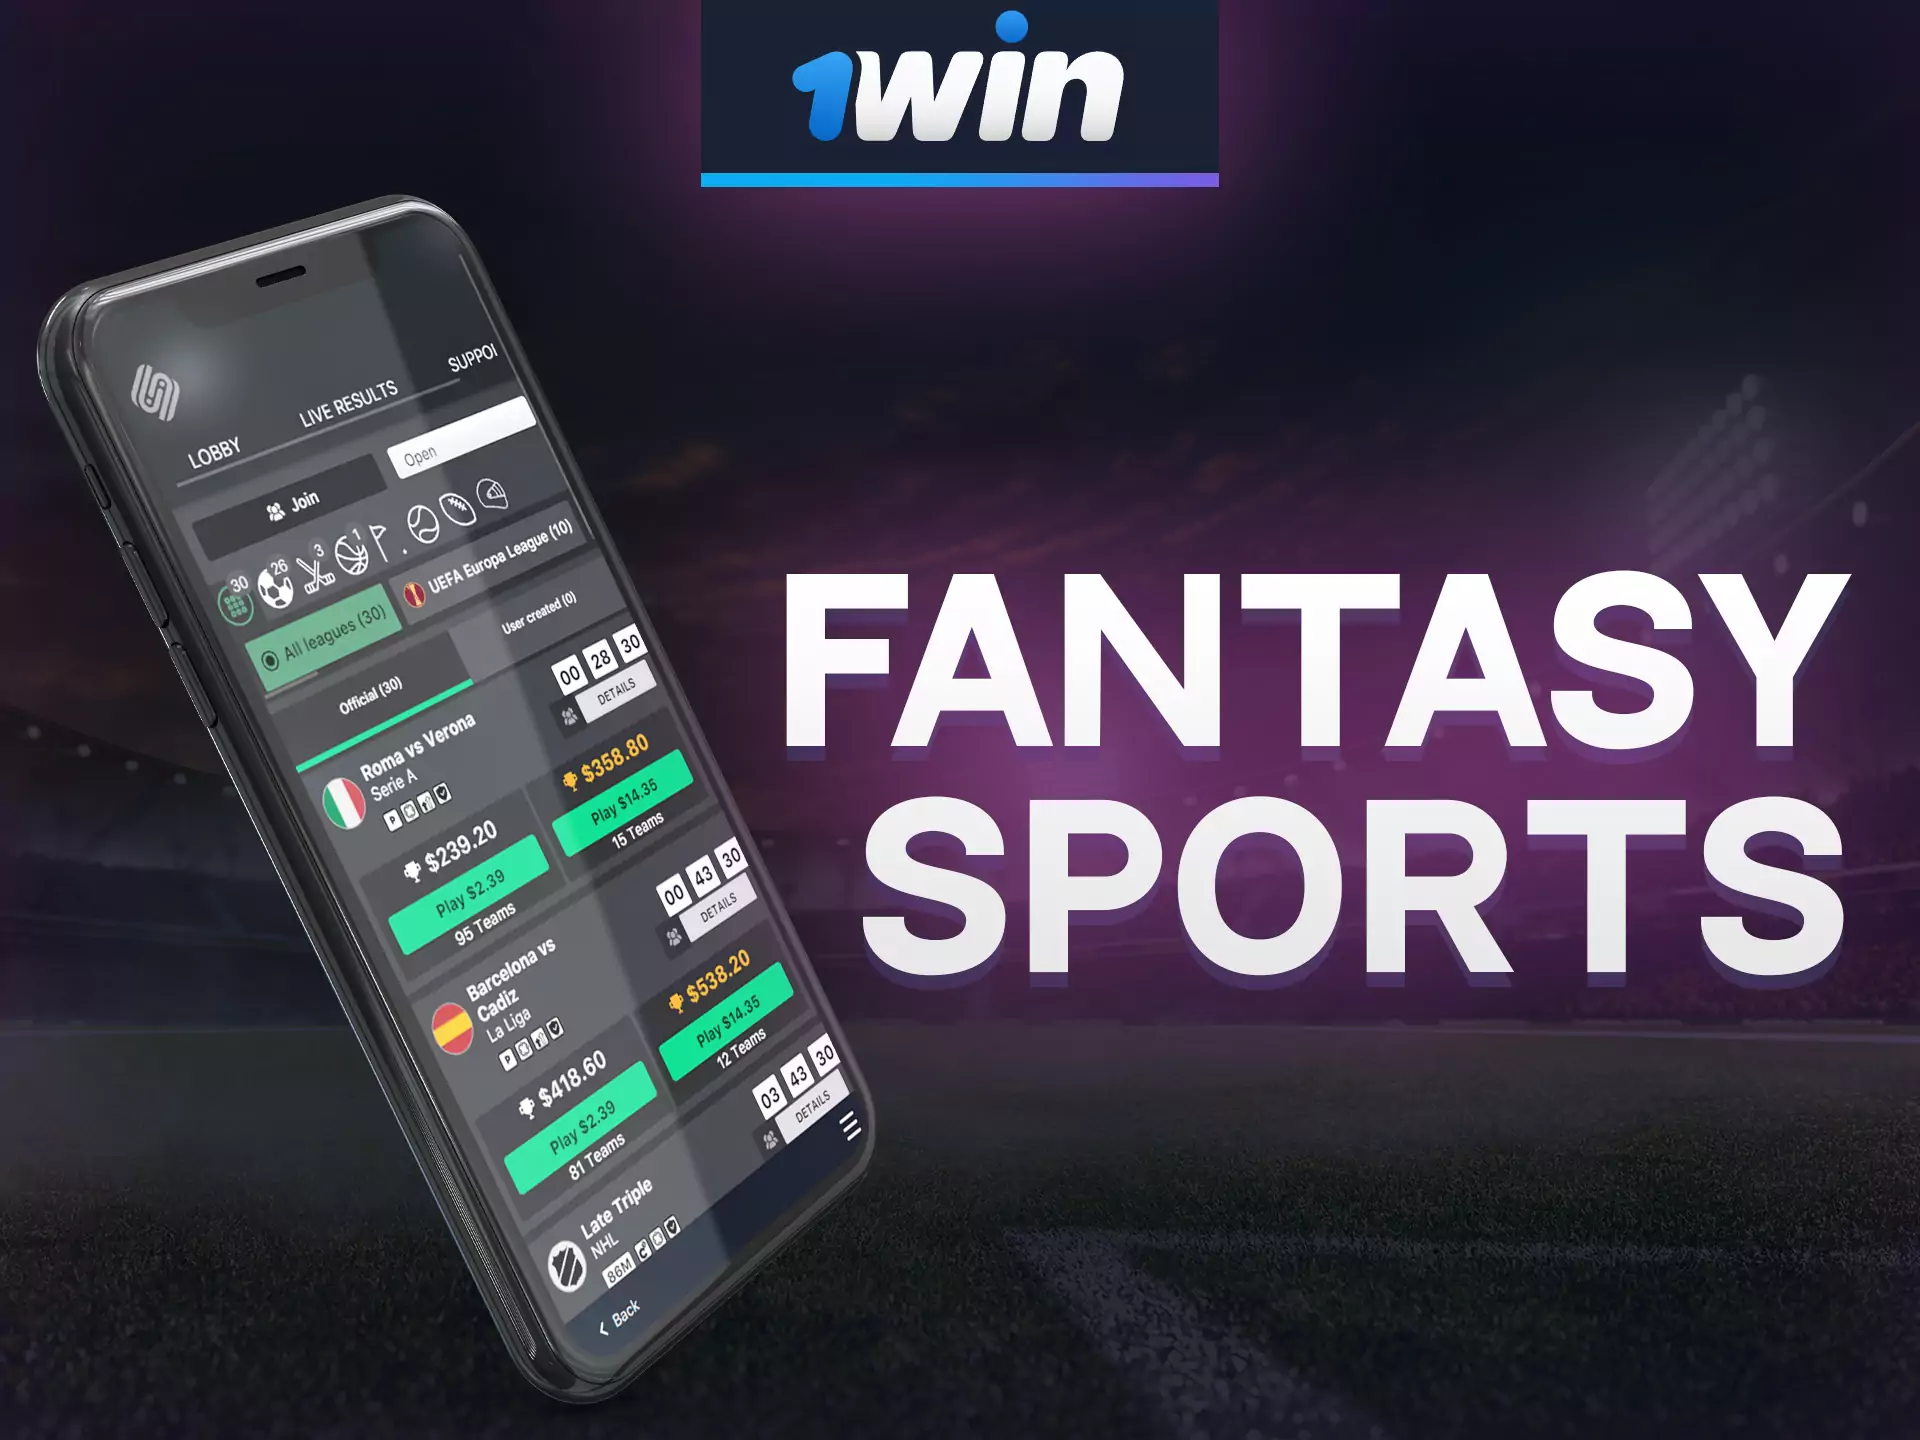 Bet on best teams of fantasy sports with 1win app.